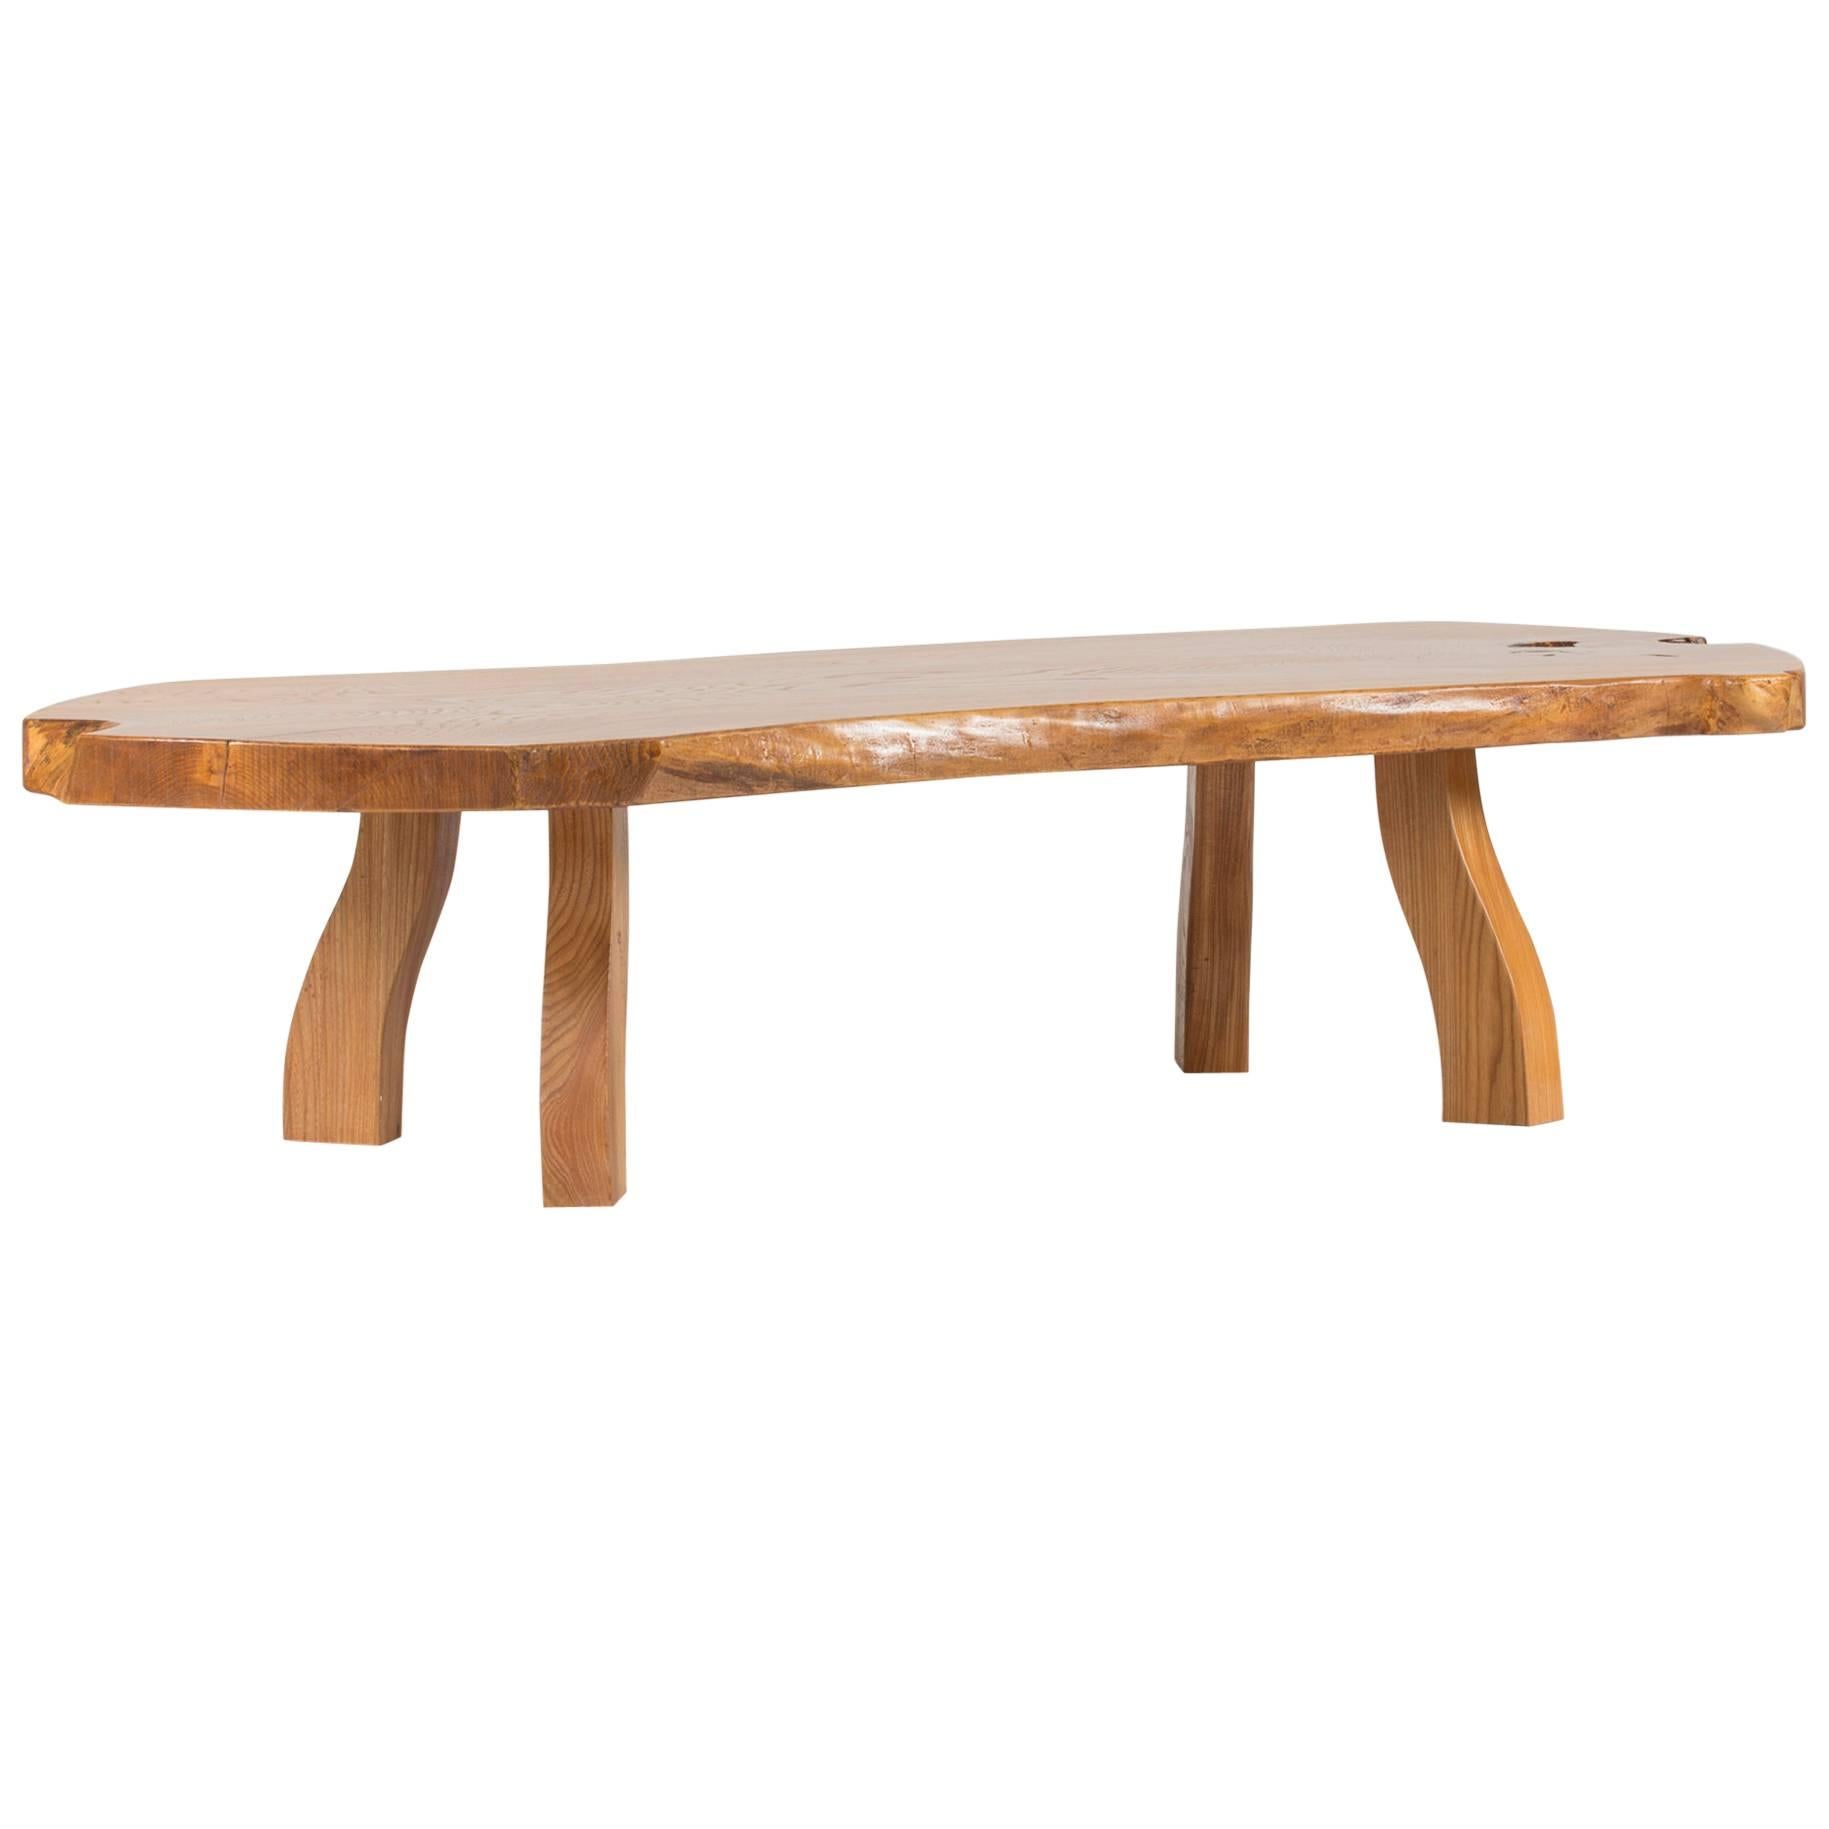 Pine Slab Coffee Table from C. A. Beijbom